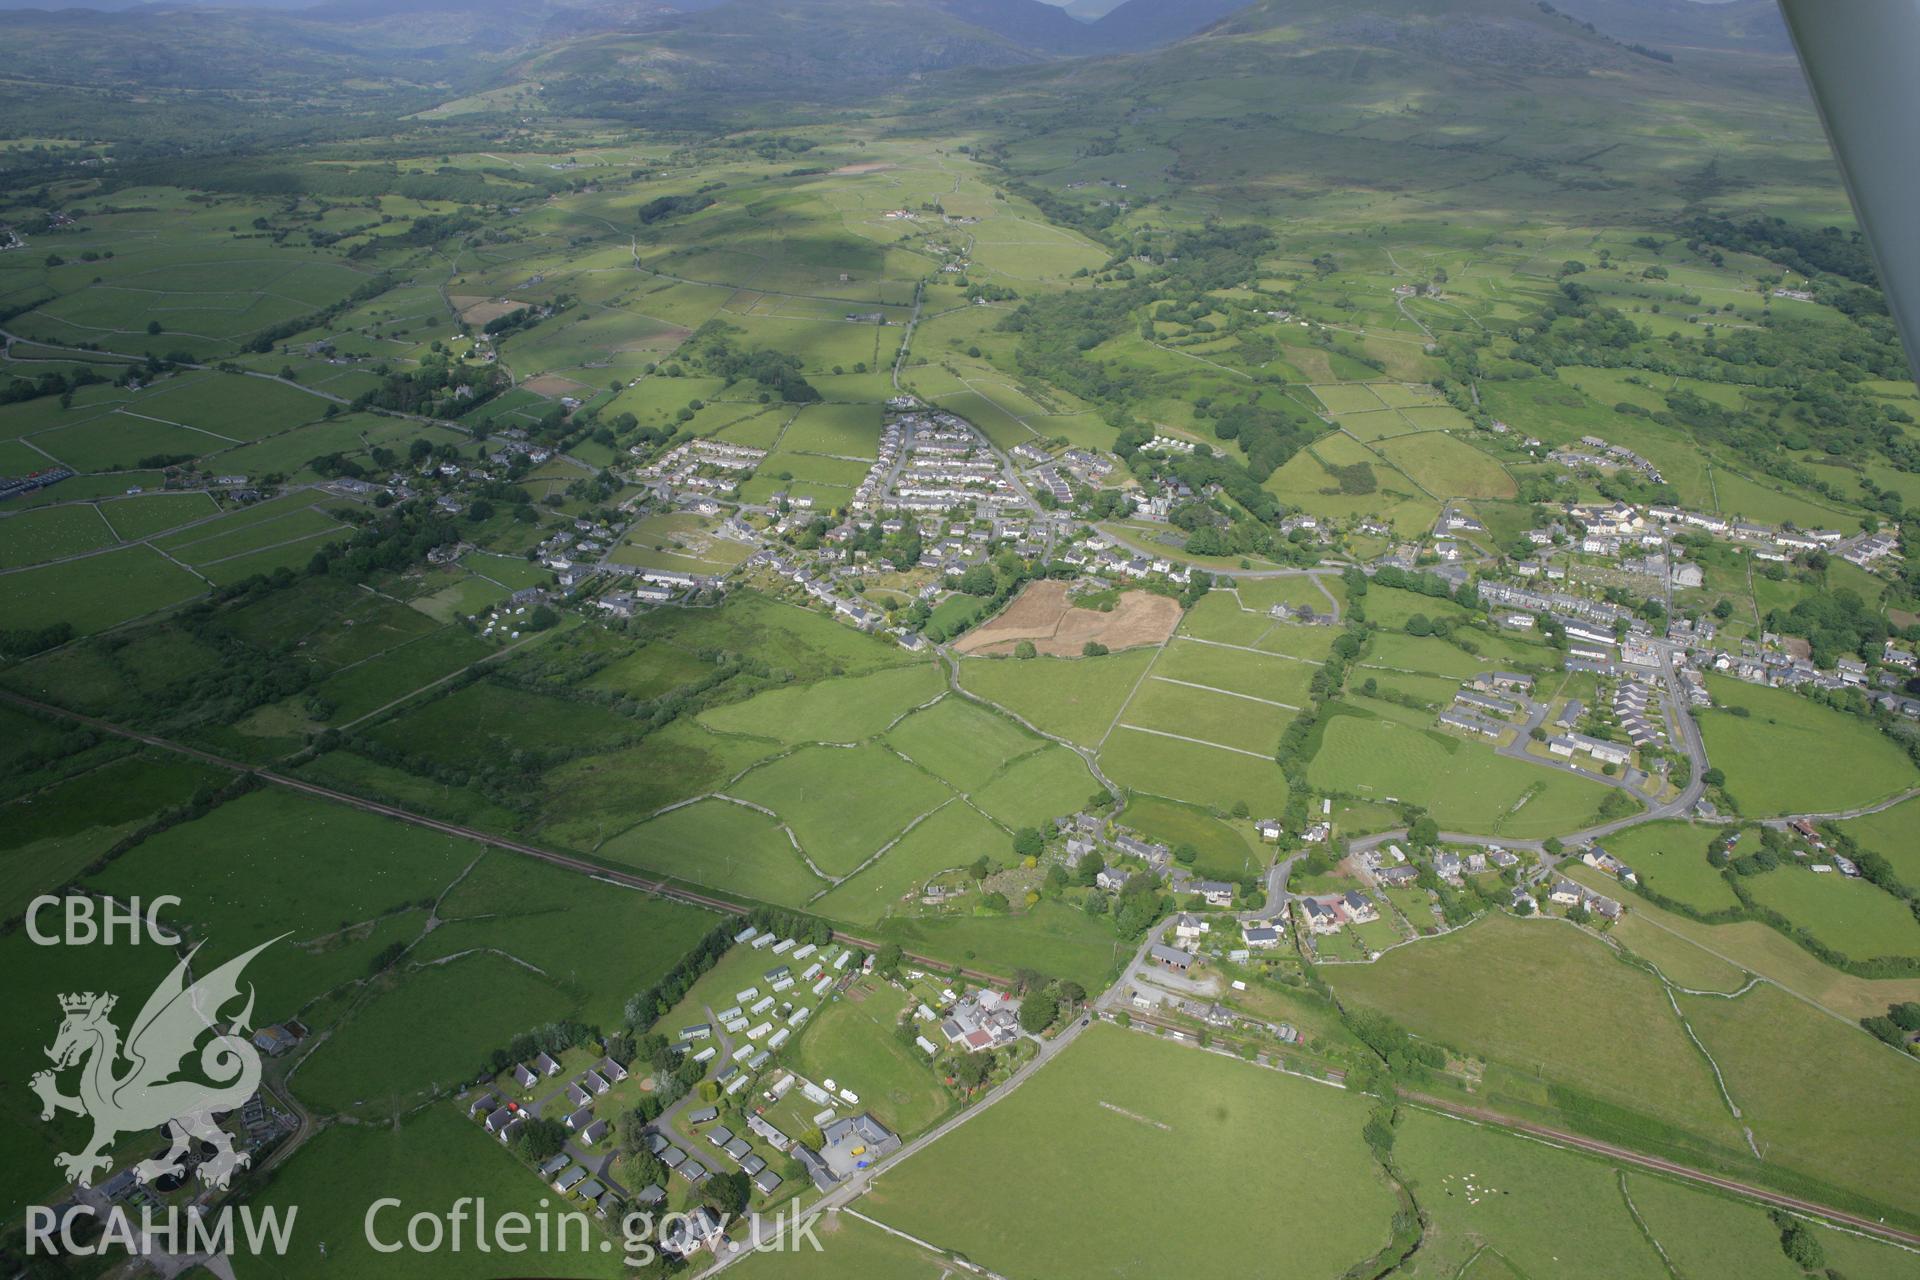 RCAHMW colour oblique photograph of Dyffryn Ardudwy, view from the south-west. Taken by Toby Driver on 13/06/2008.